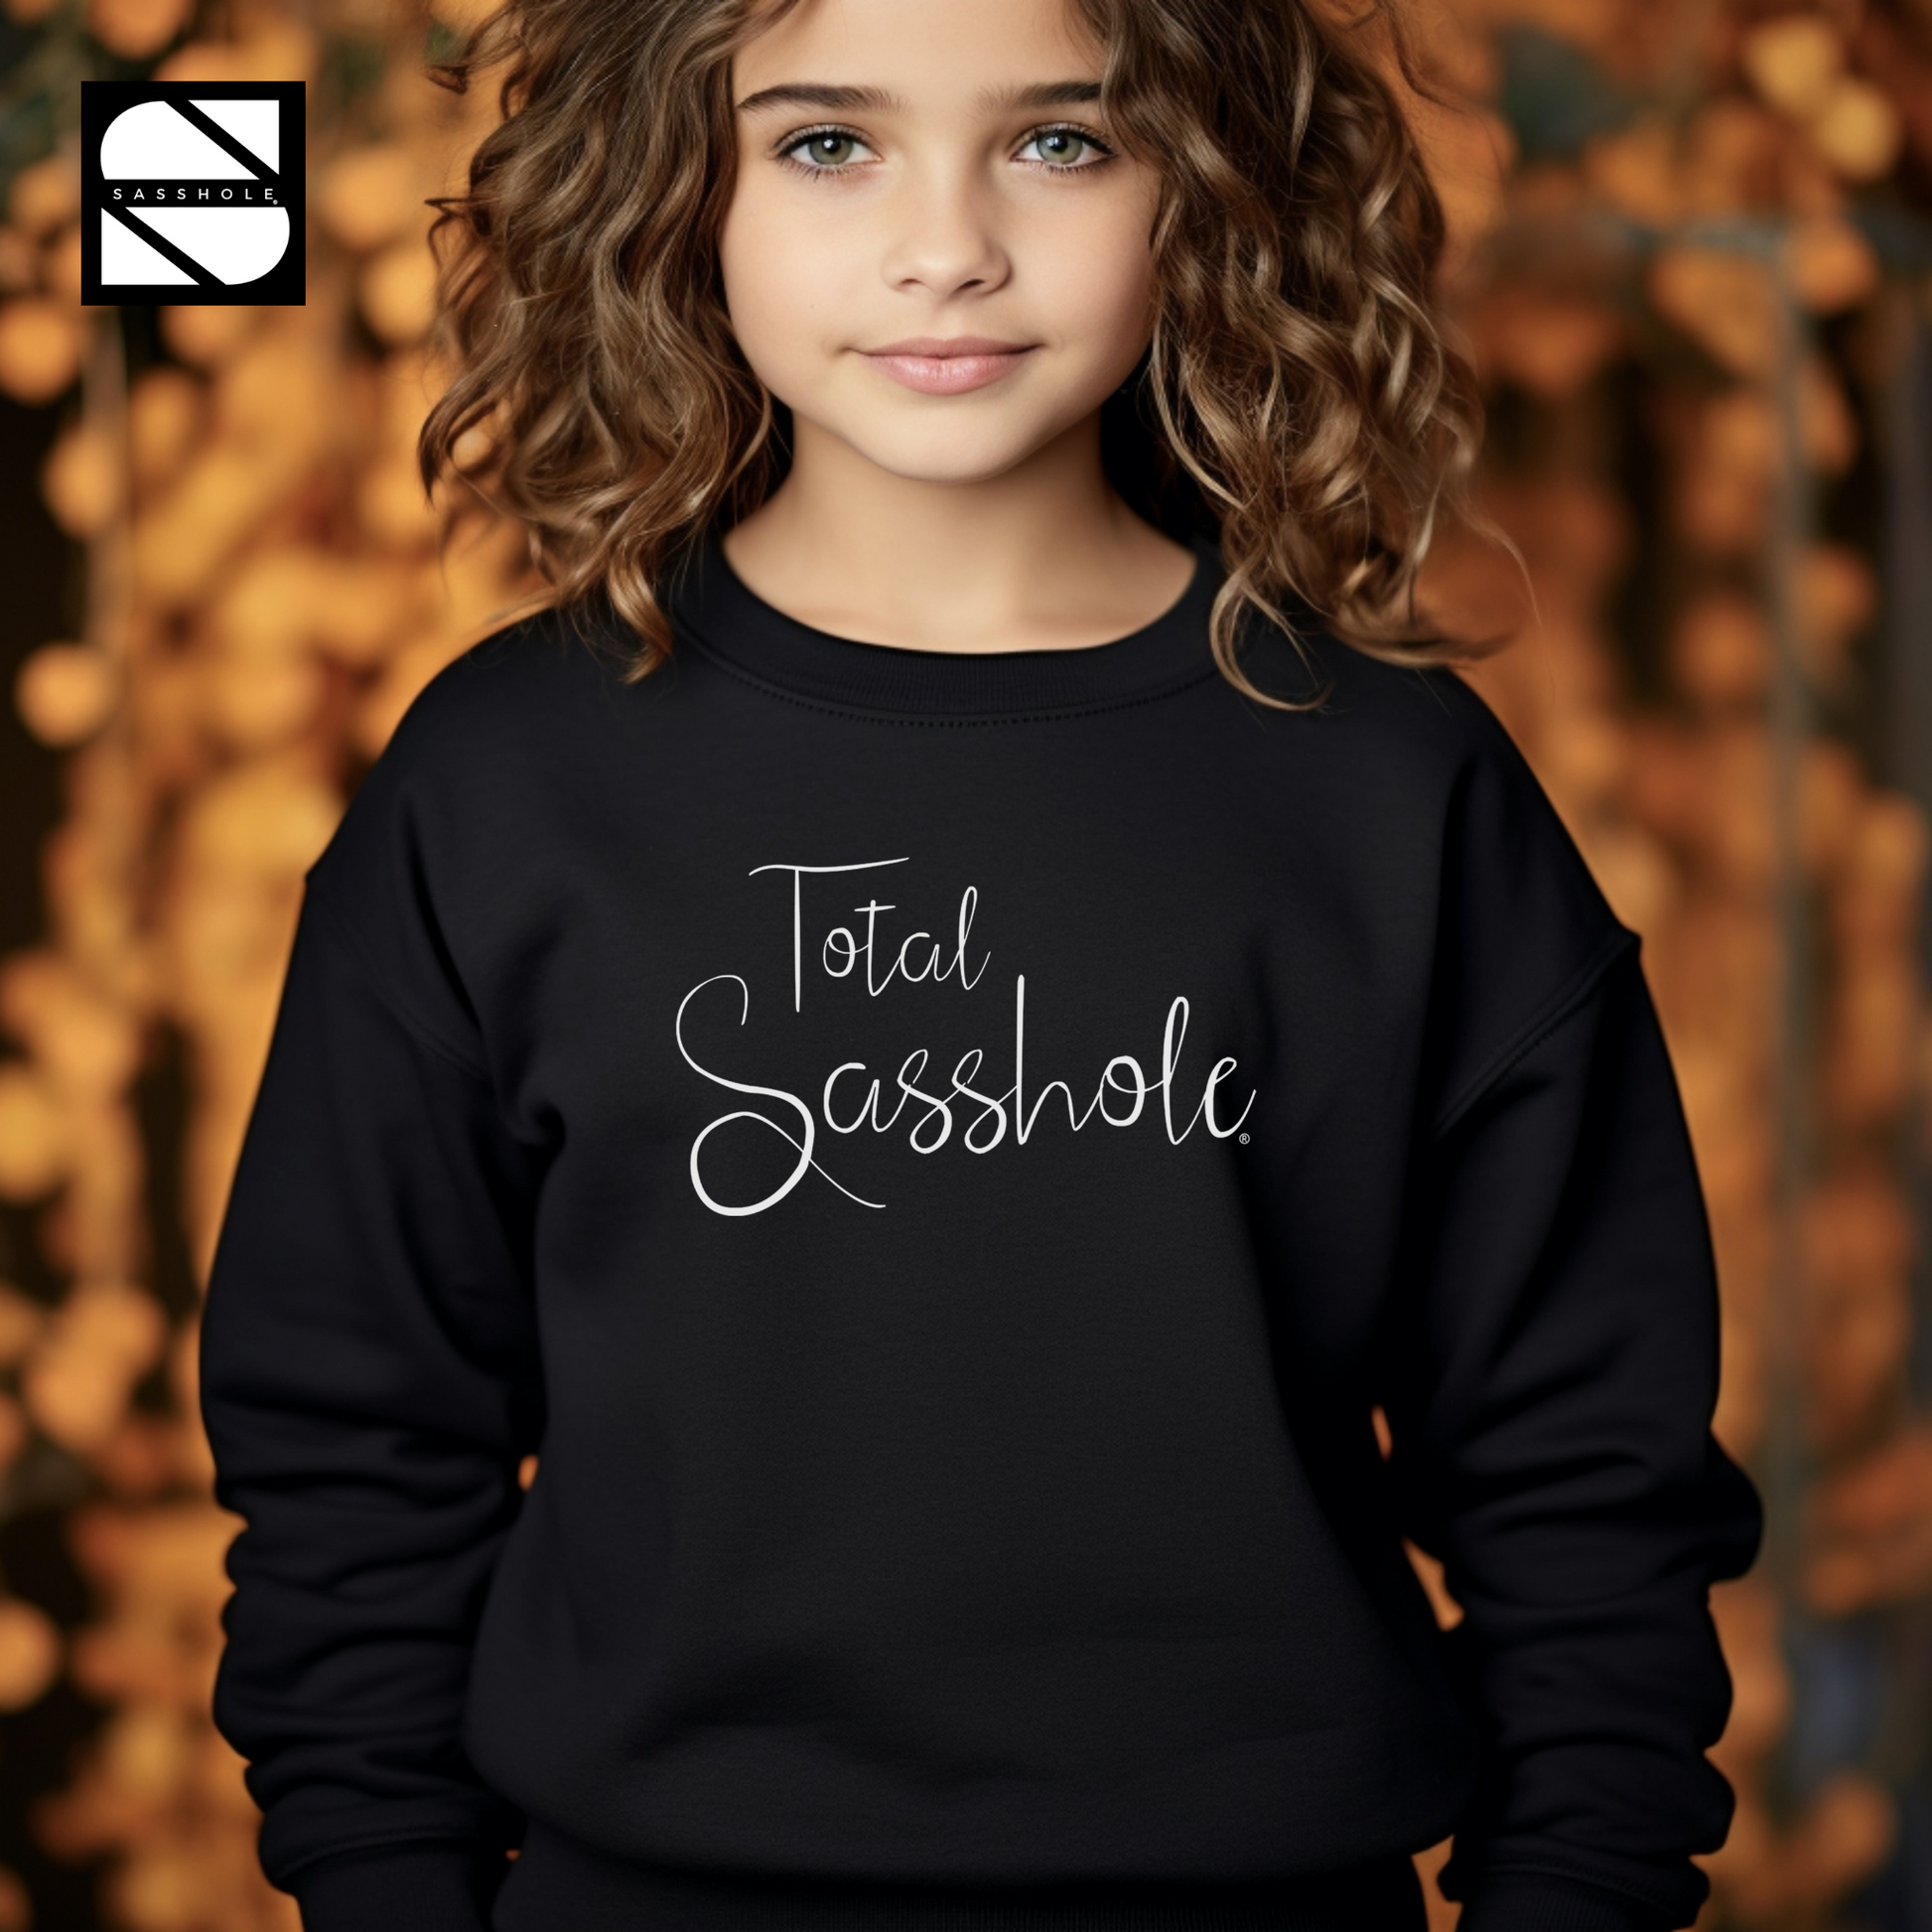 Youthful vibes, Youthful expressions, Youth hoodie, Vibrant styles, Urban chic for kids, Unique hoodie designs, Trendy kids clothing, Trendsetting toddlers, Toddler street style, Sweatshirts, Stylish youngsters, Statement apparel for kids, Sassy kids wear, Sasshole Youth Collection, Sass meets comfort, Quirky kidswear, Quality kidswear, Playful designs, Personality-packed hoodies, Little fashionistas